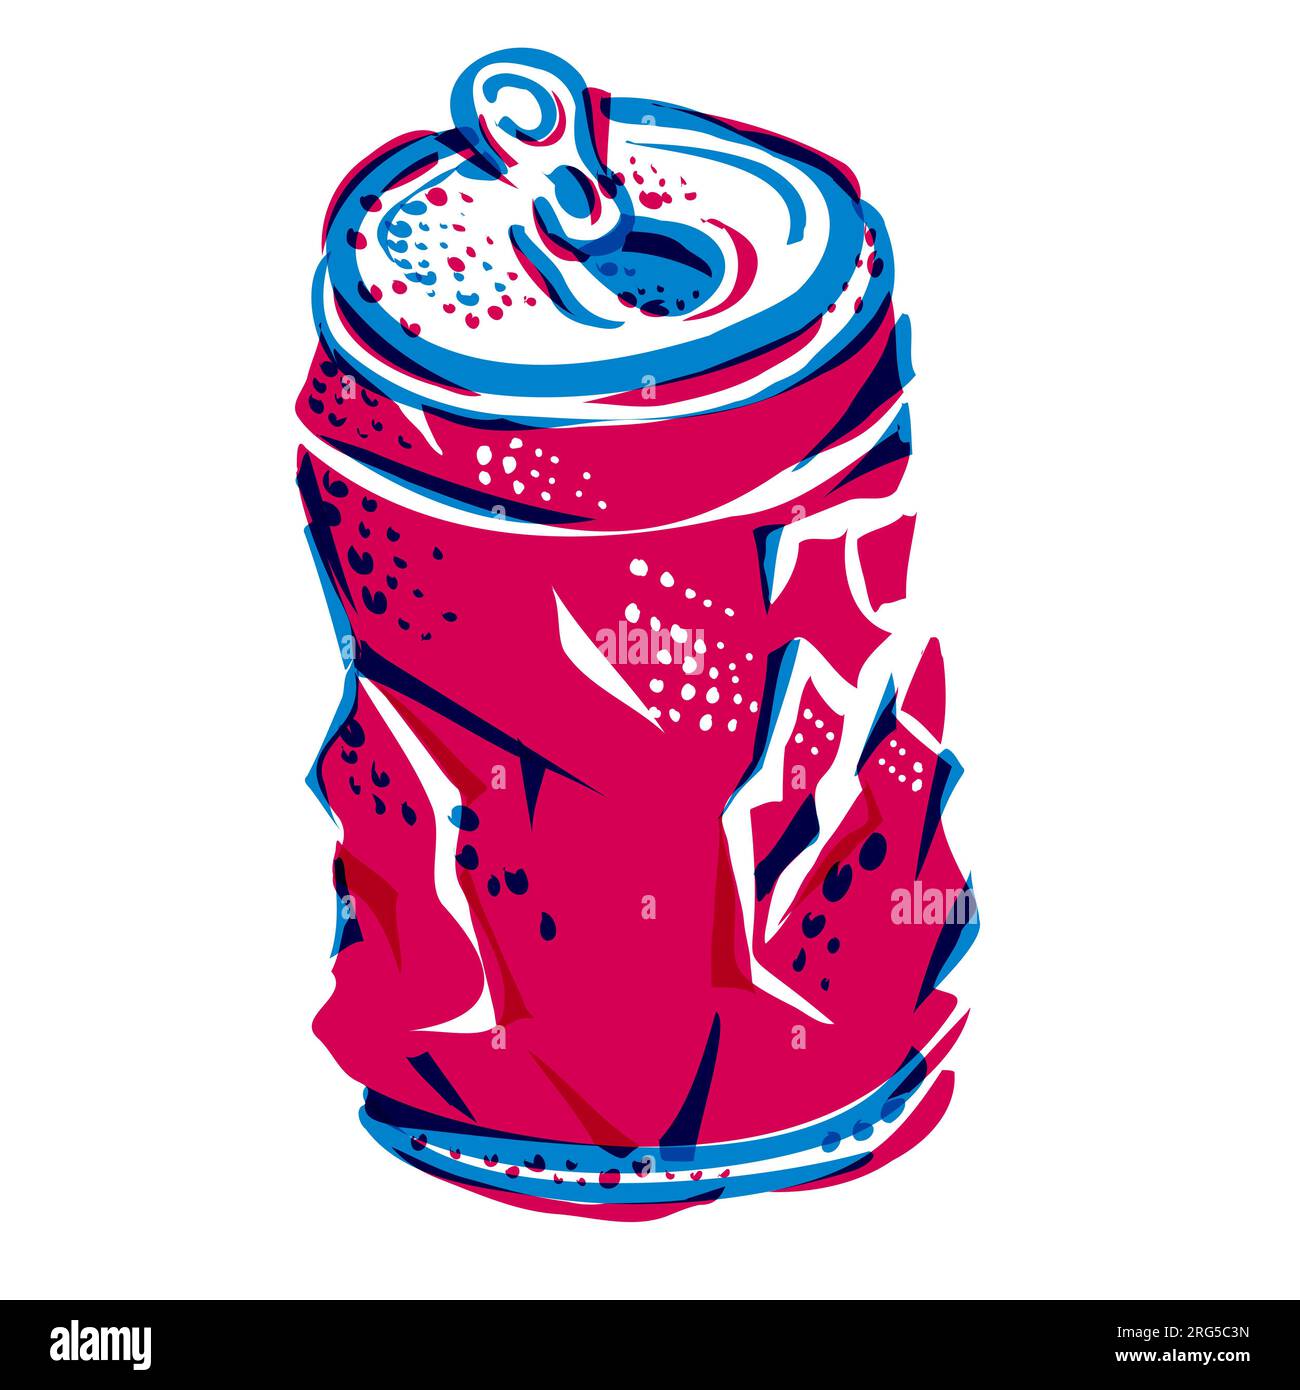 Risograph technique illustration of a crumpled can of soda cola drink done in retro riso effect digital screen printing style. Stock Photo